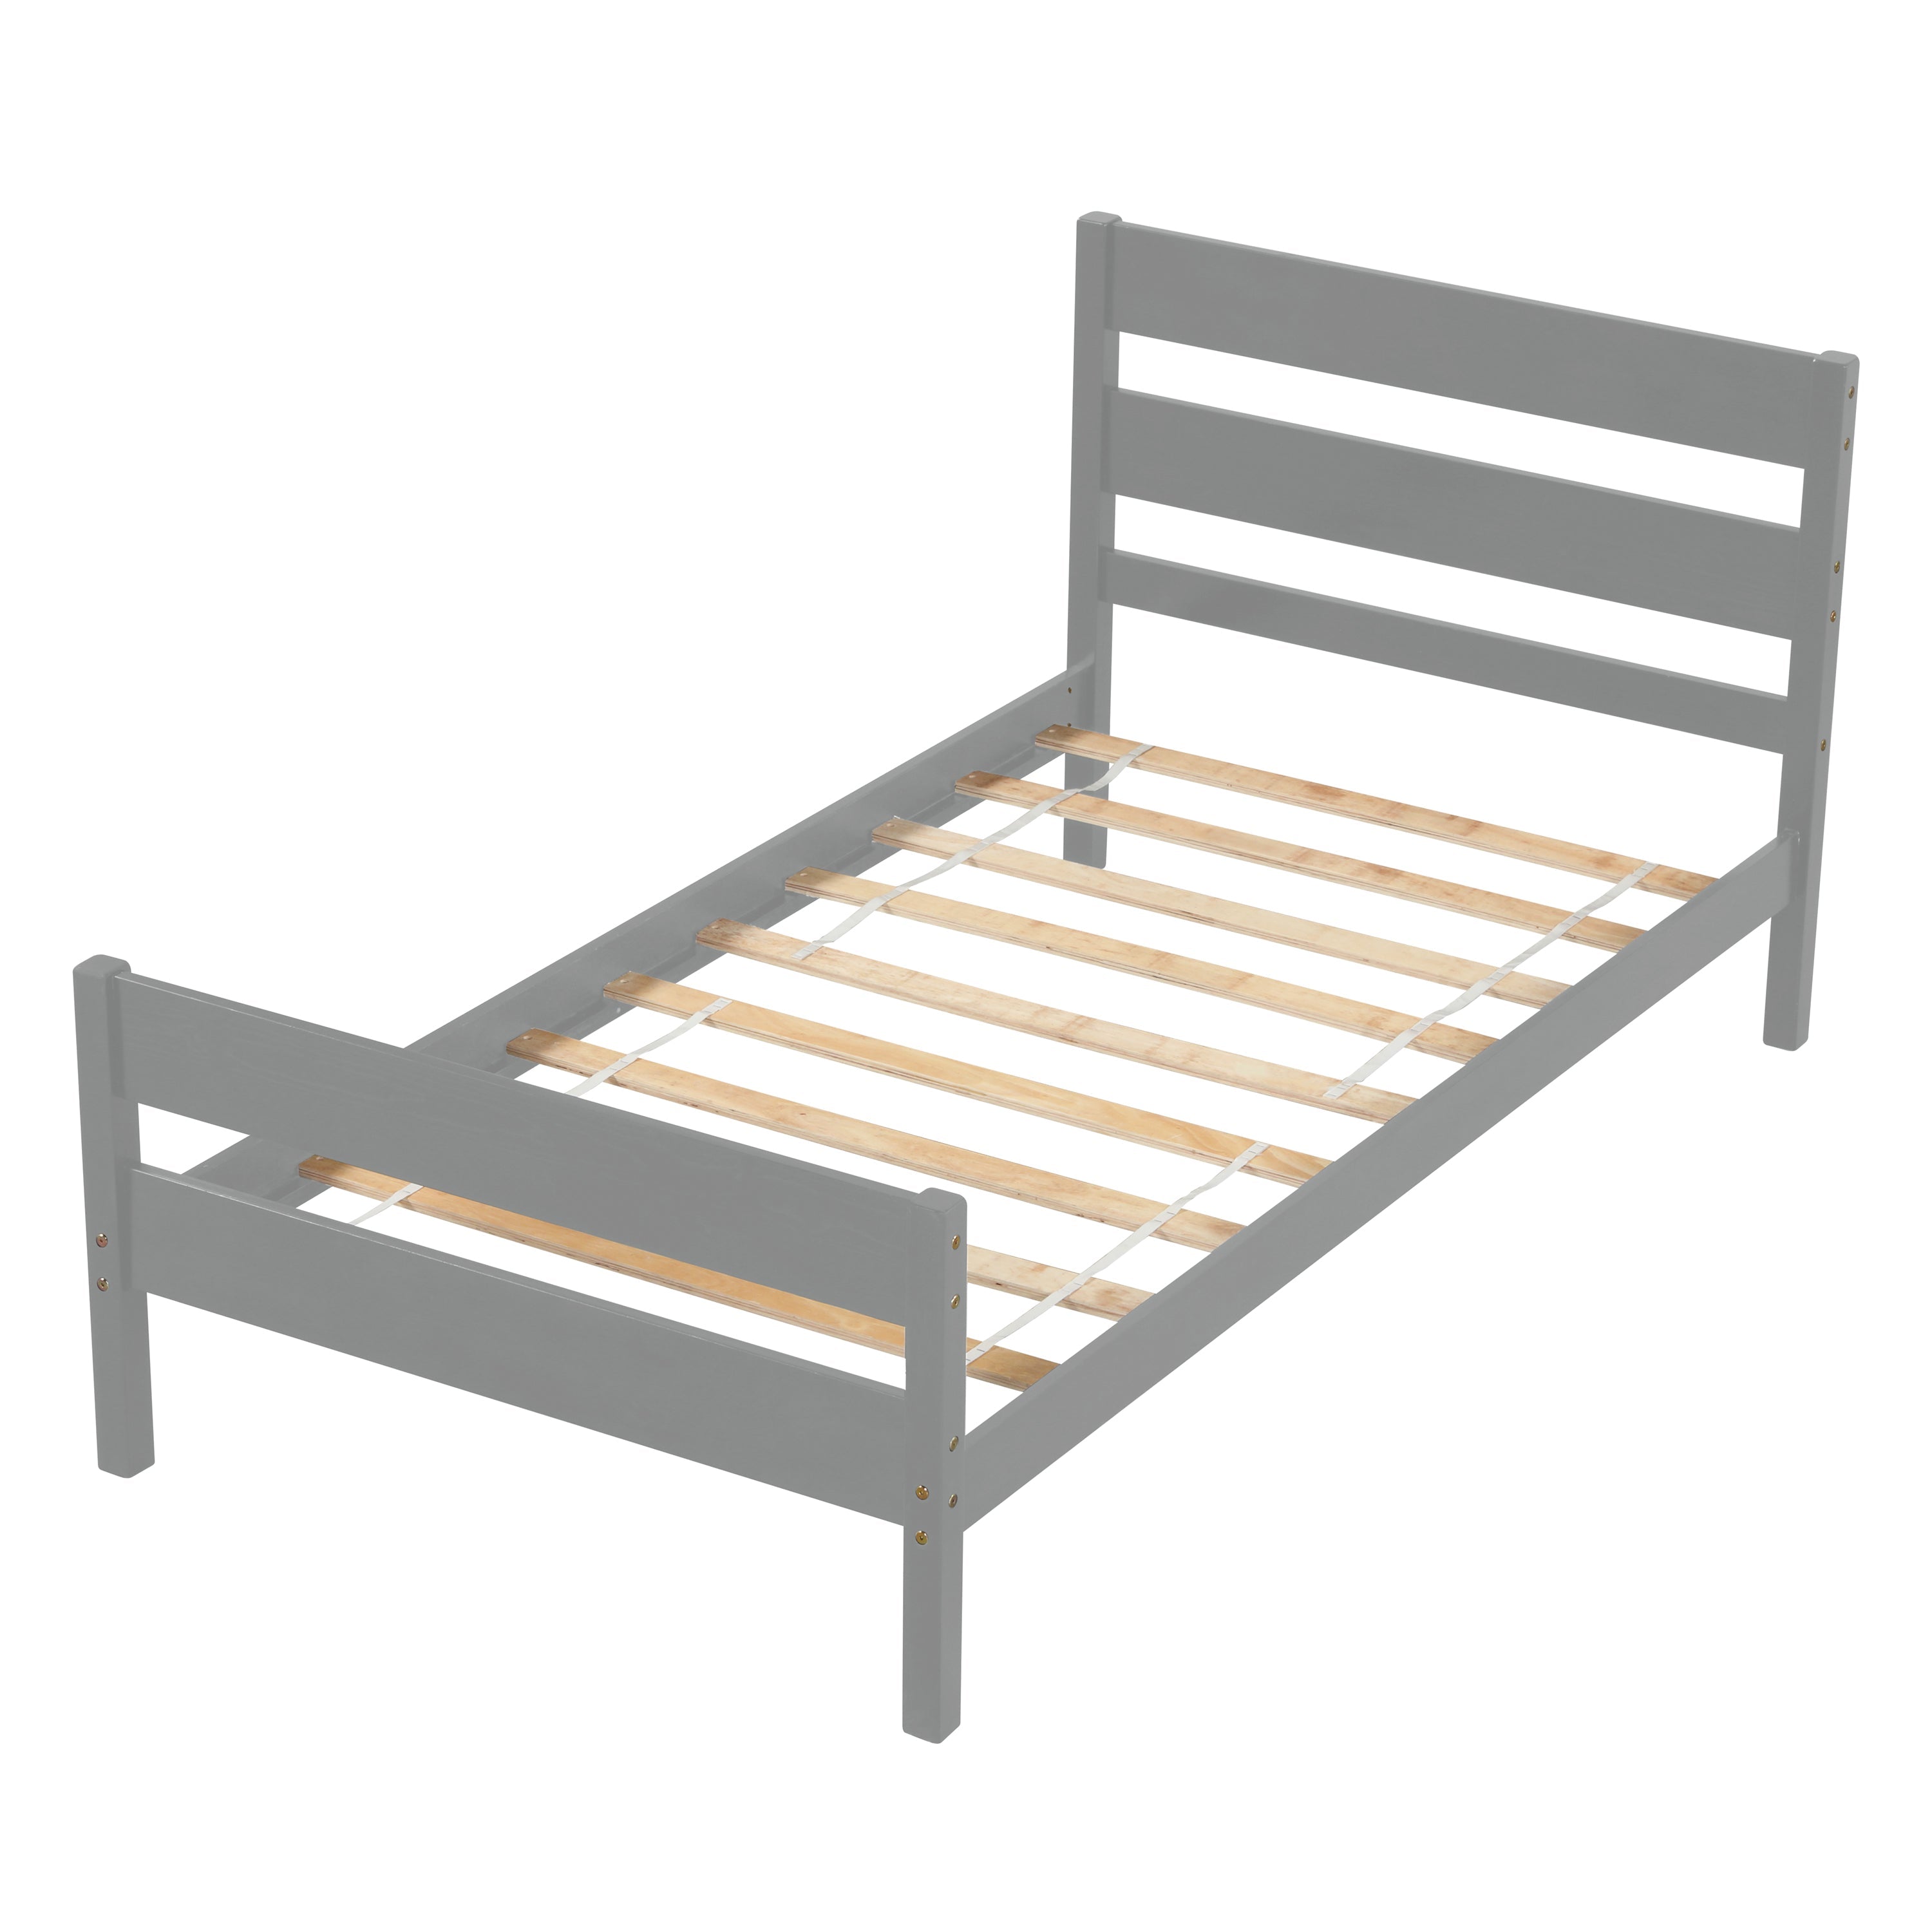 uhomepro Twin Bed Frame No Box Spring Needed, Wood Platform Bed Frame with Headboard and Footboard, Strong Wooden Slats, Twin Bed Frames for Kids, Adults, Modern Bedroom Furniture, Gray